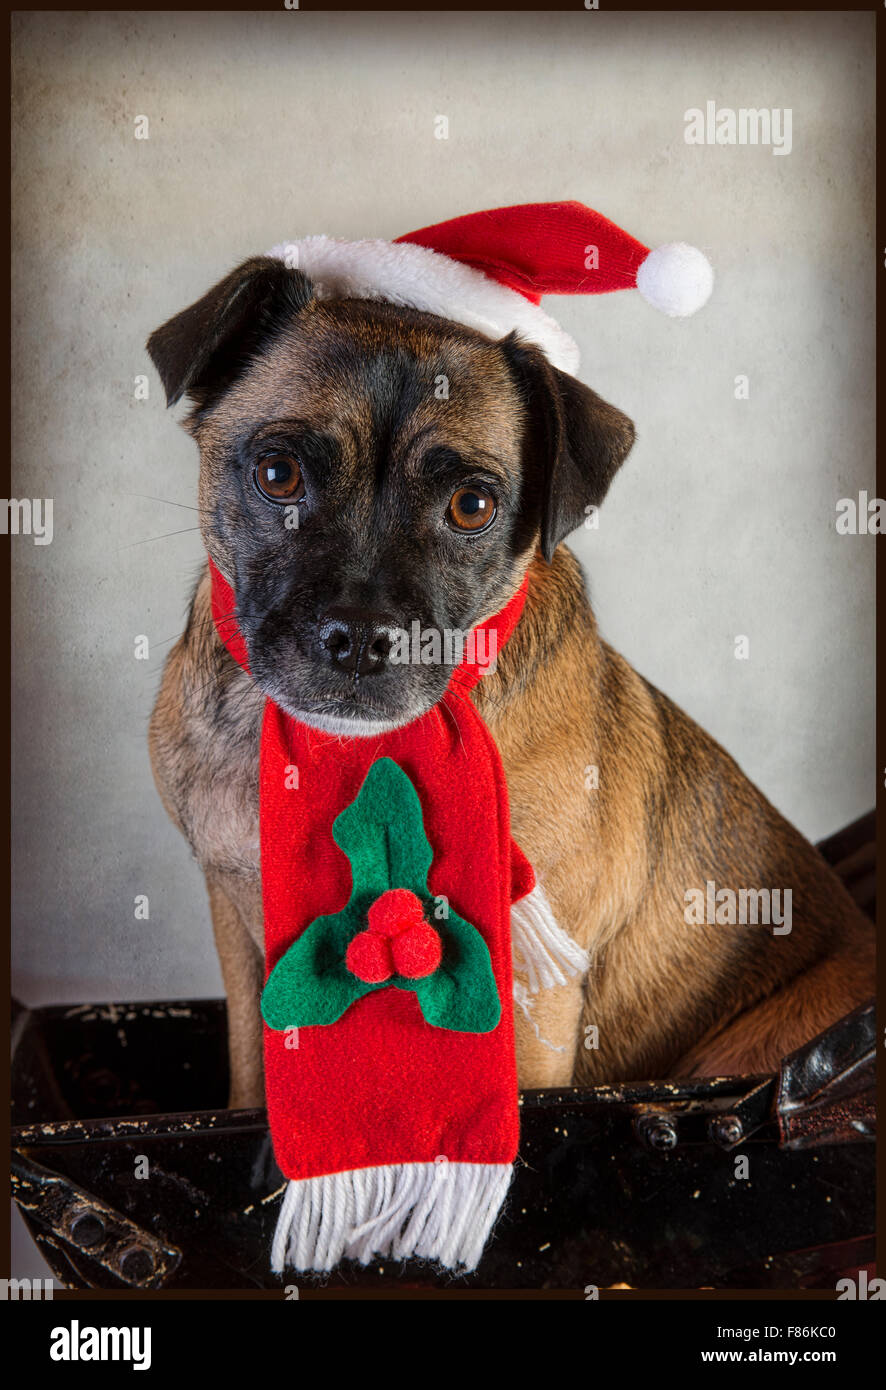 Cute Pug cross dog in Santa hat and scarf Banque D'Images